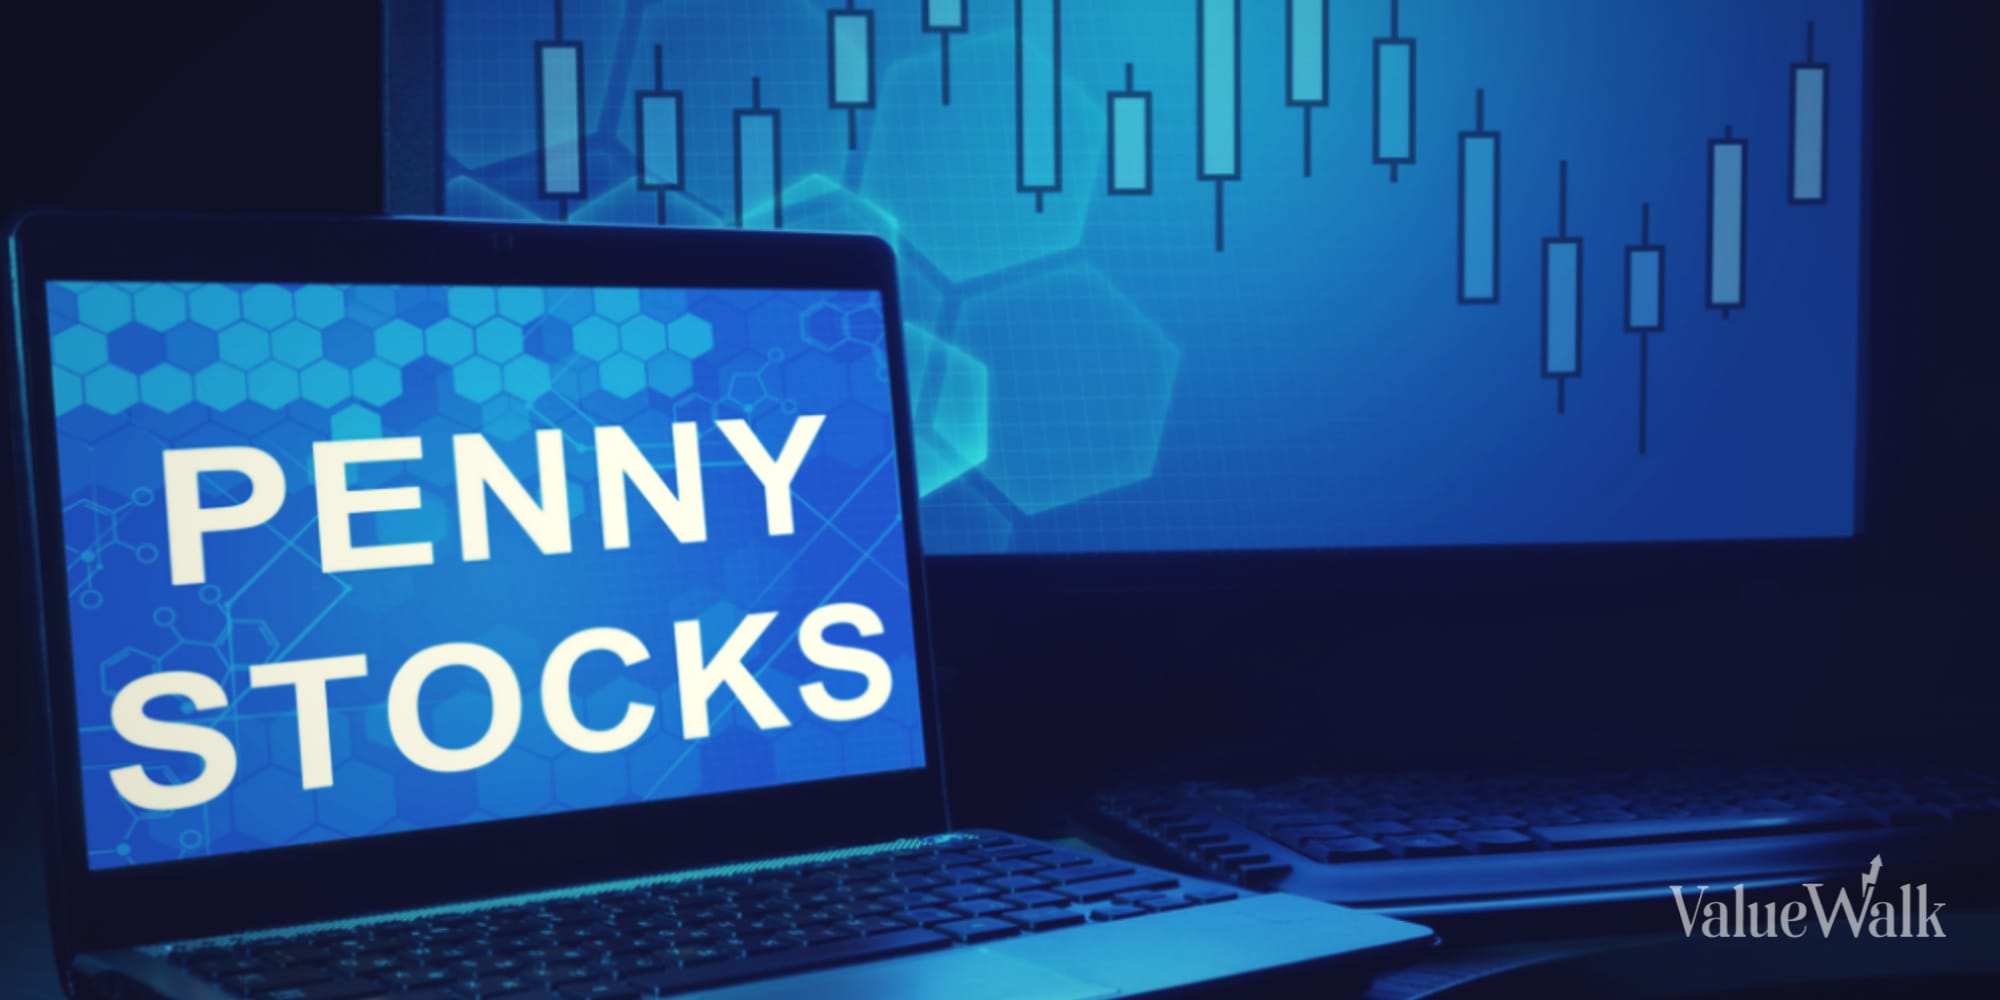 Top Penny Stocks to Buy